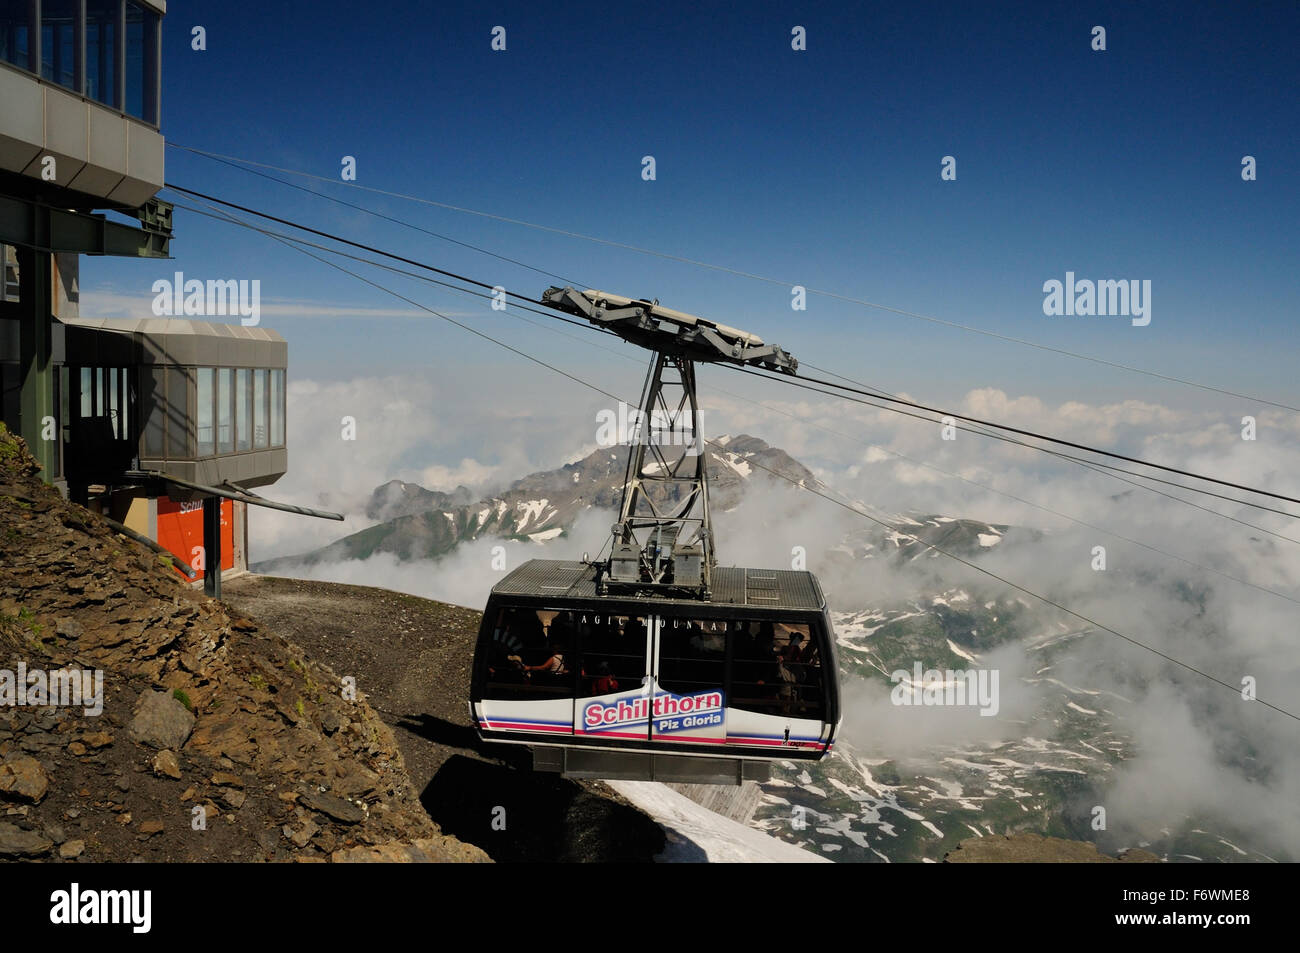 Cablecar arriving at the summit of the Schilthorn (2970m), the location of the Piz Gloria revolving restaurant. Stock Photo